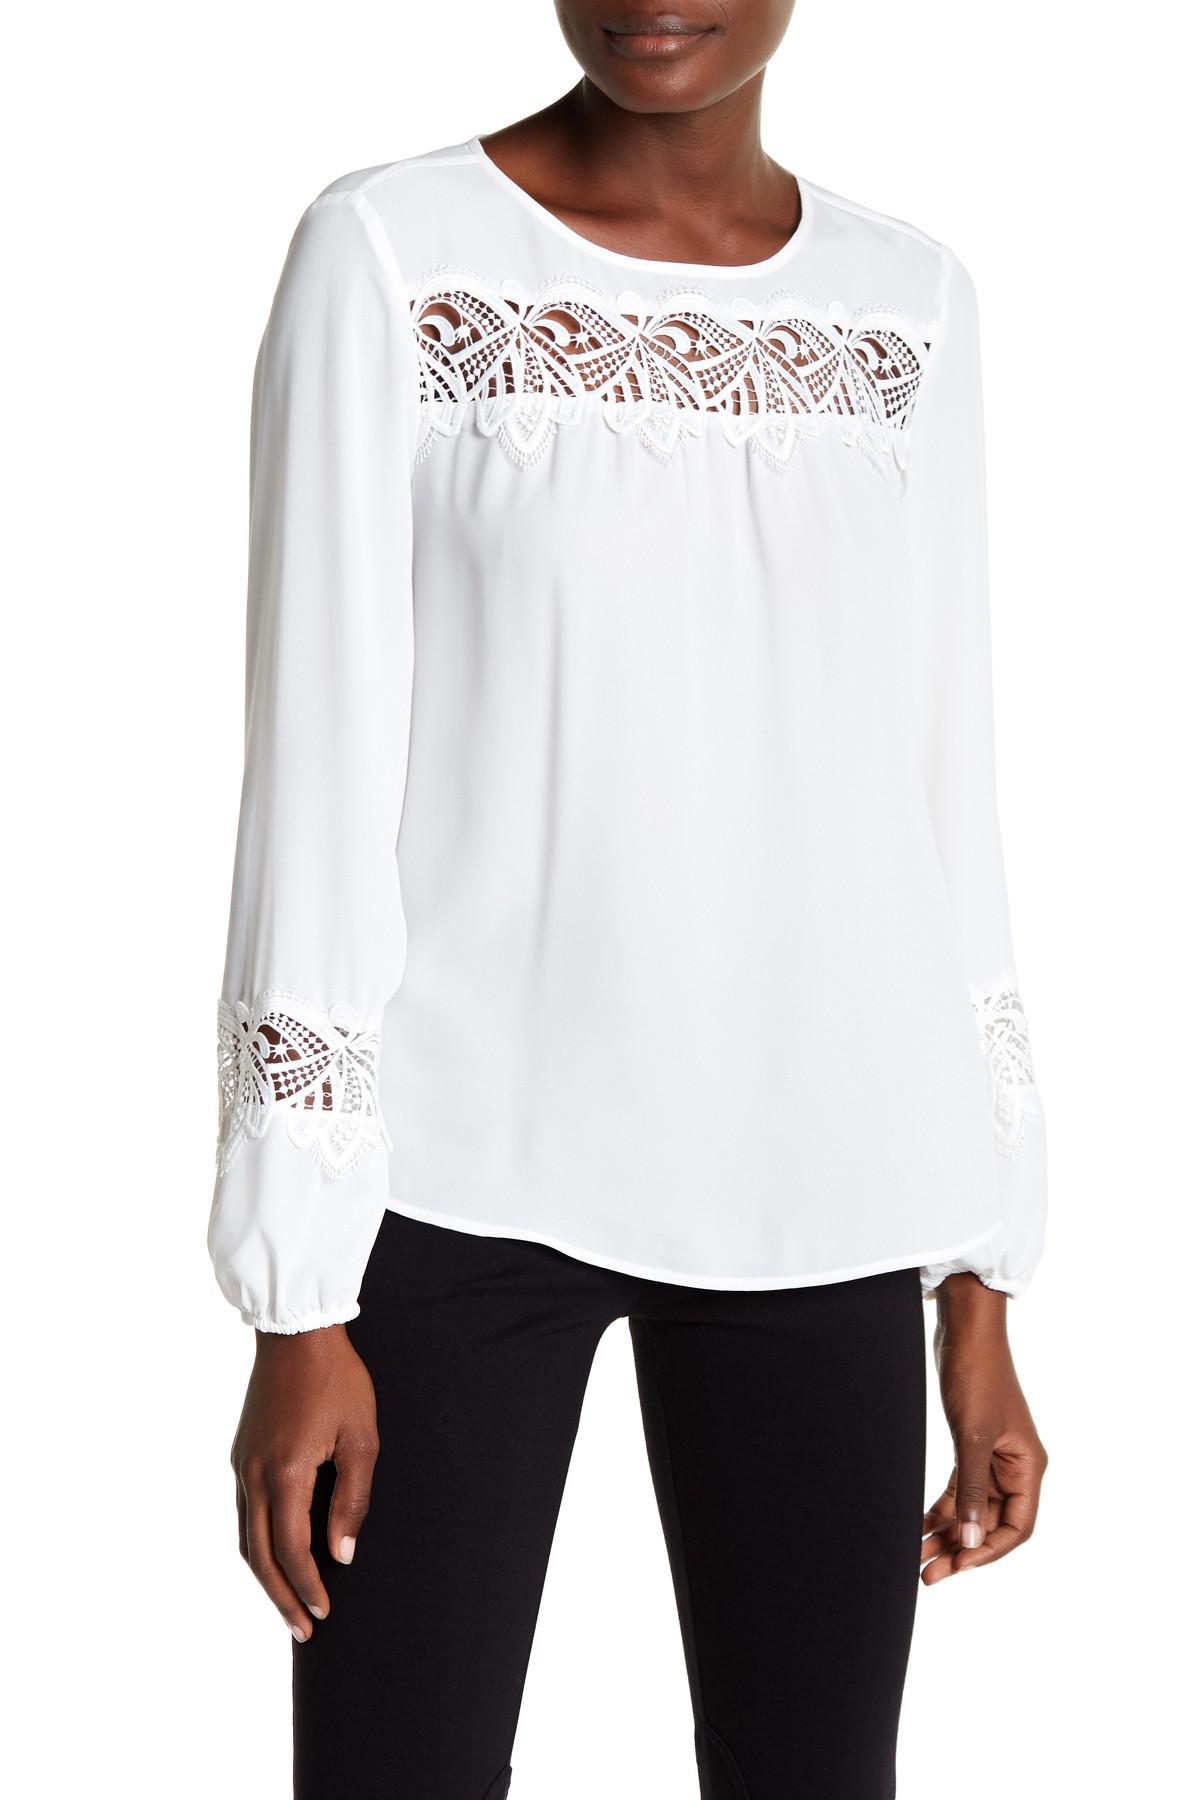 Lyst - Tommy Hilfiger Lace Trim Blouse in White